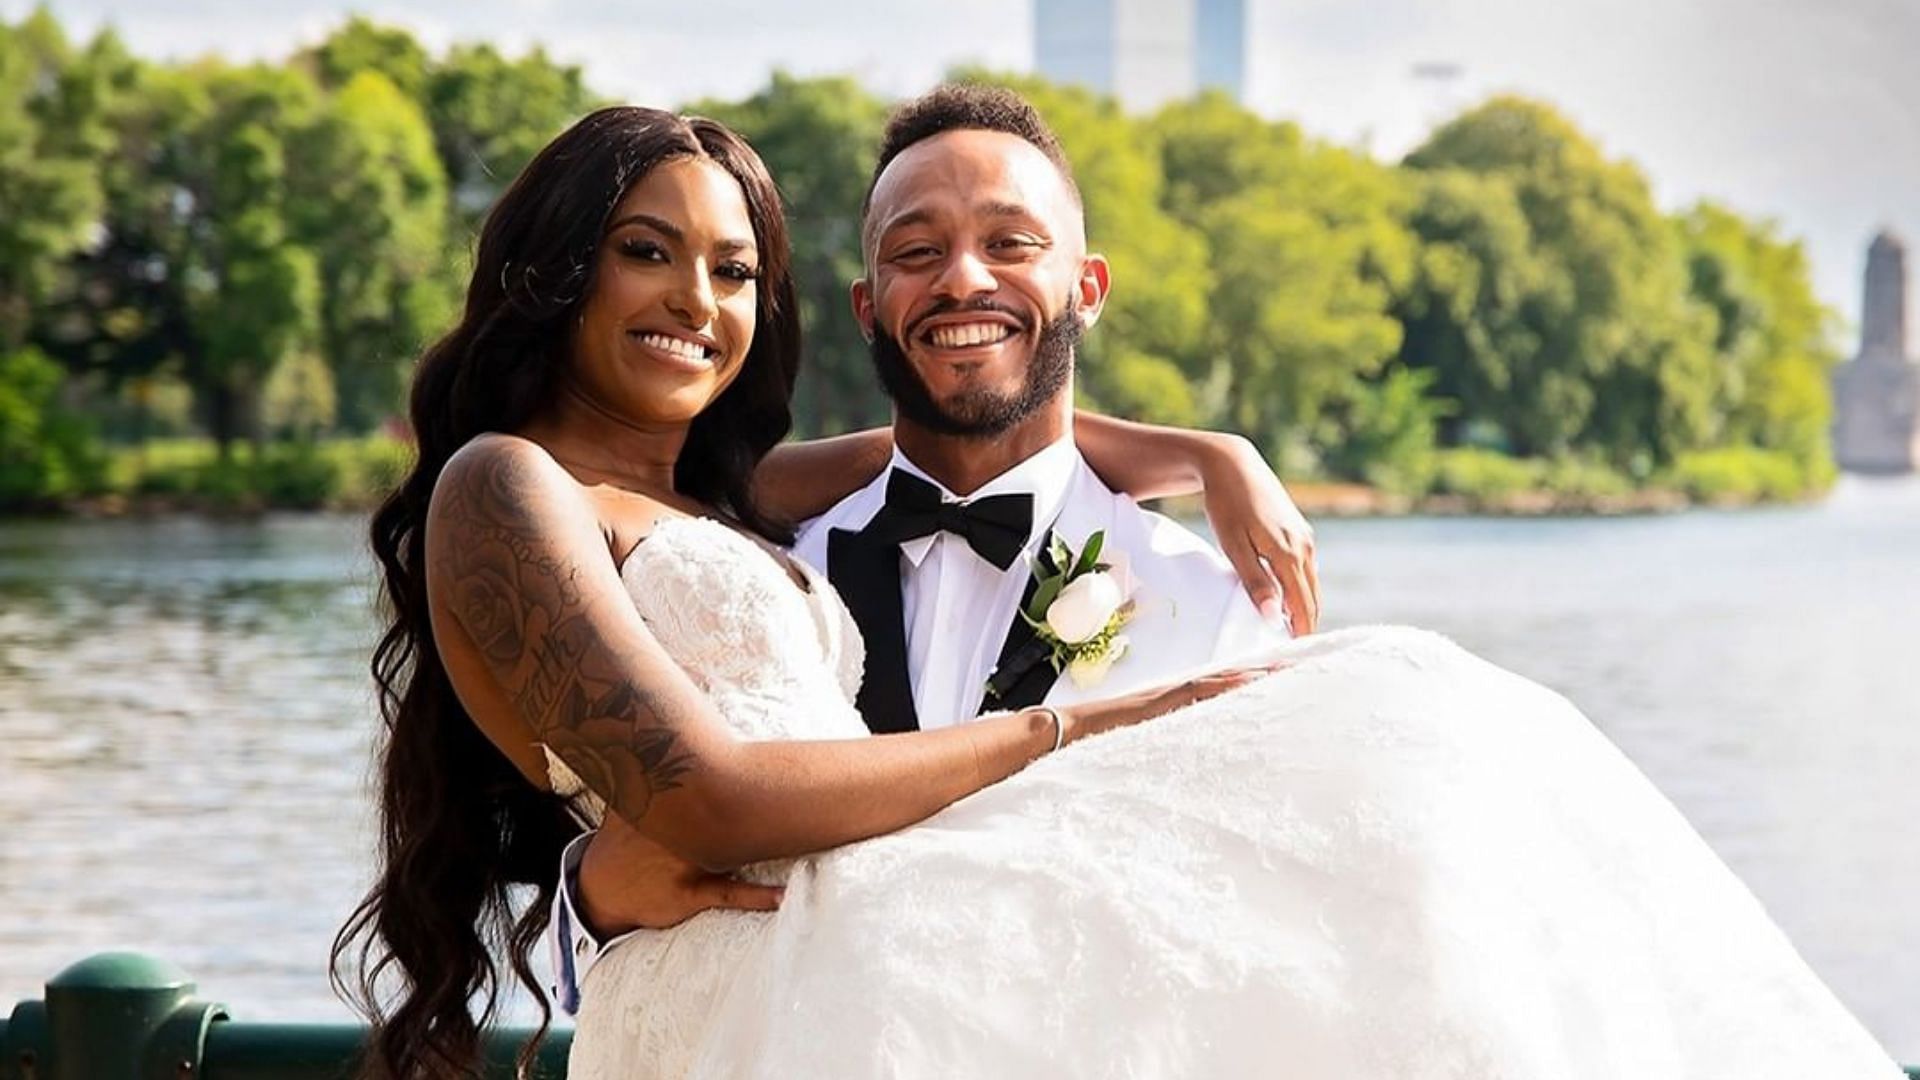 Married at First Sight season 14 cast Where are they now?